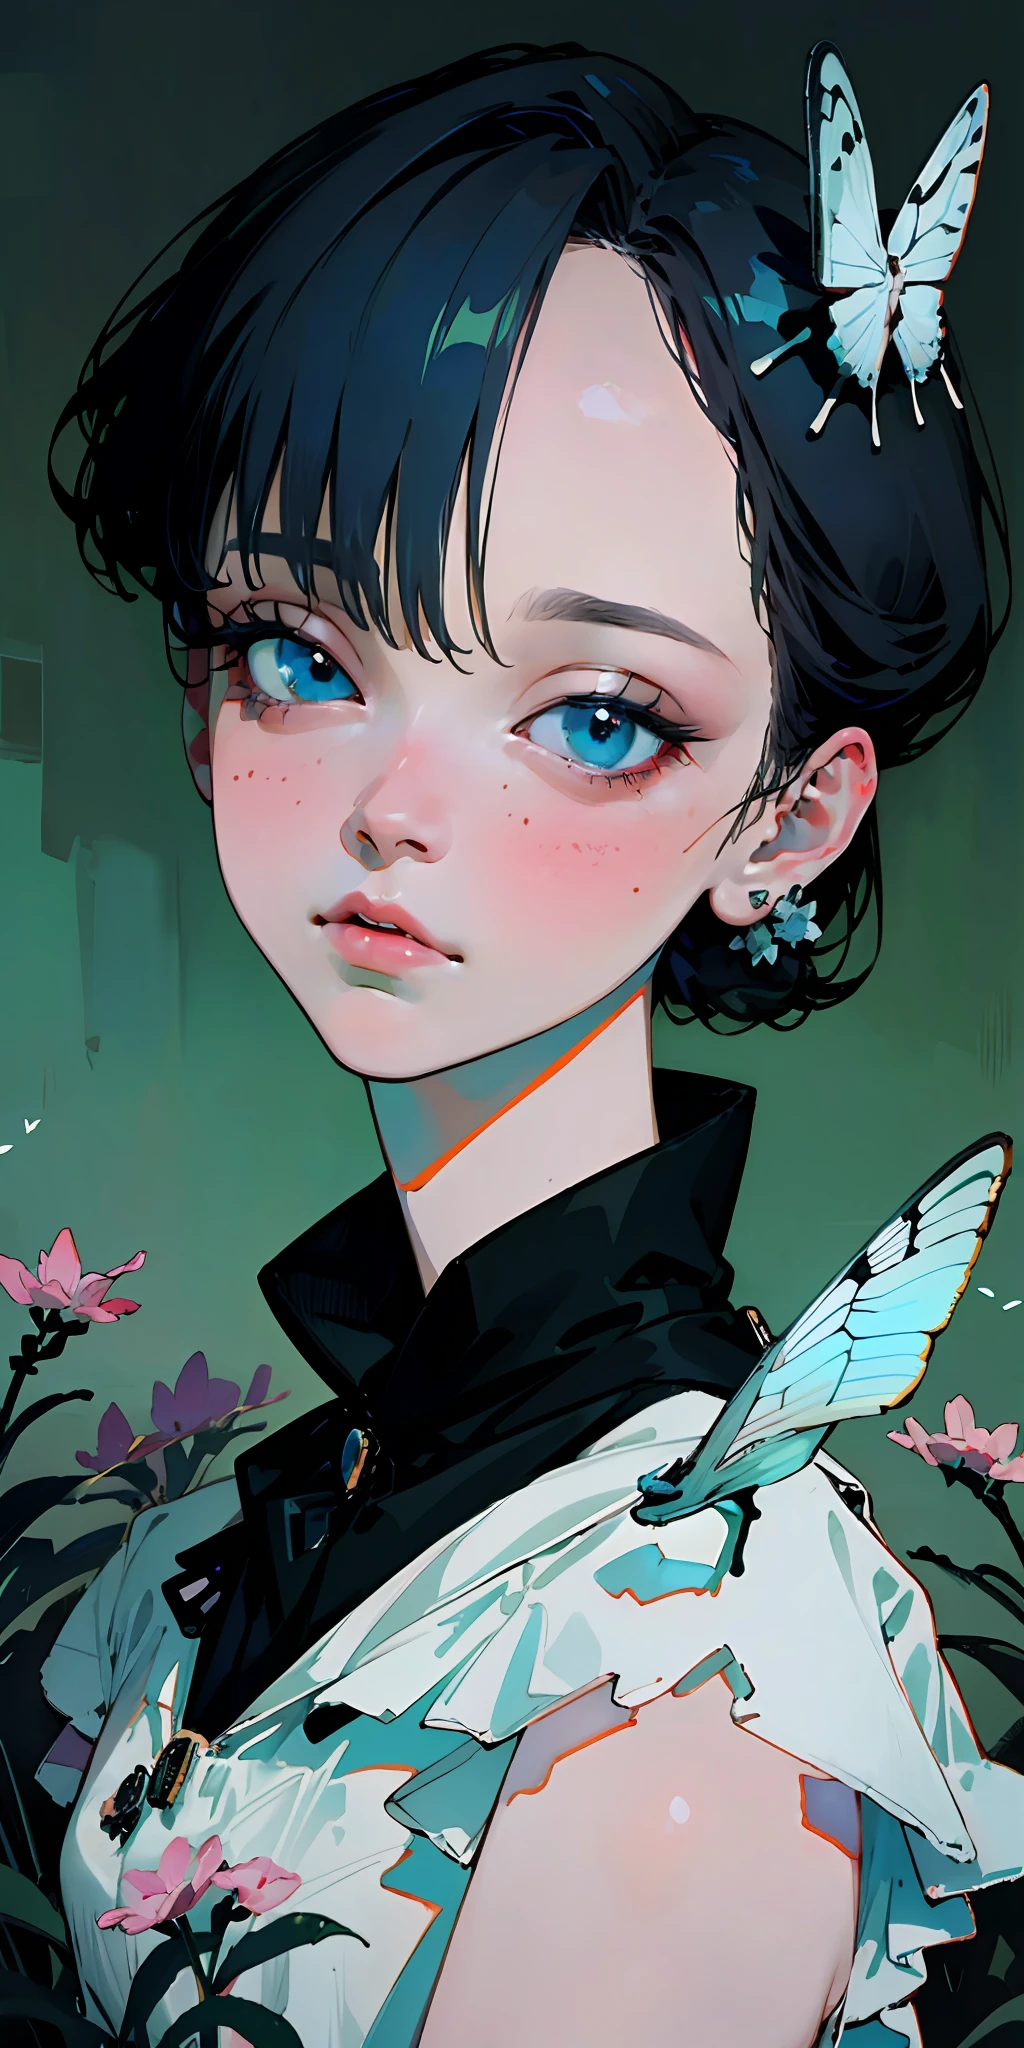 (top quality, masterpiece, super realistic), portrait of one beautiful and delicate girl with a soft and sad expression, the landscape in the background is a garden with flowering bushes and butterflies flying around in blue tones.